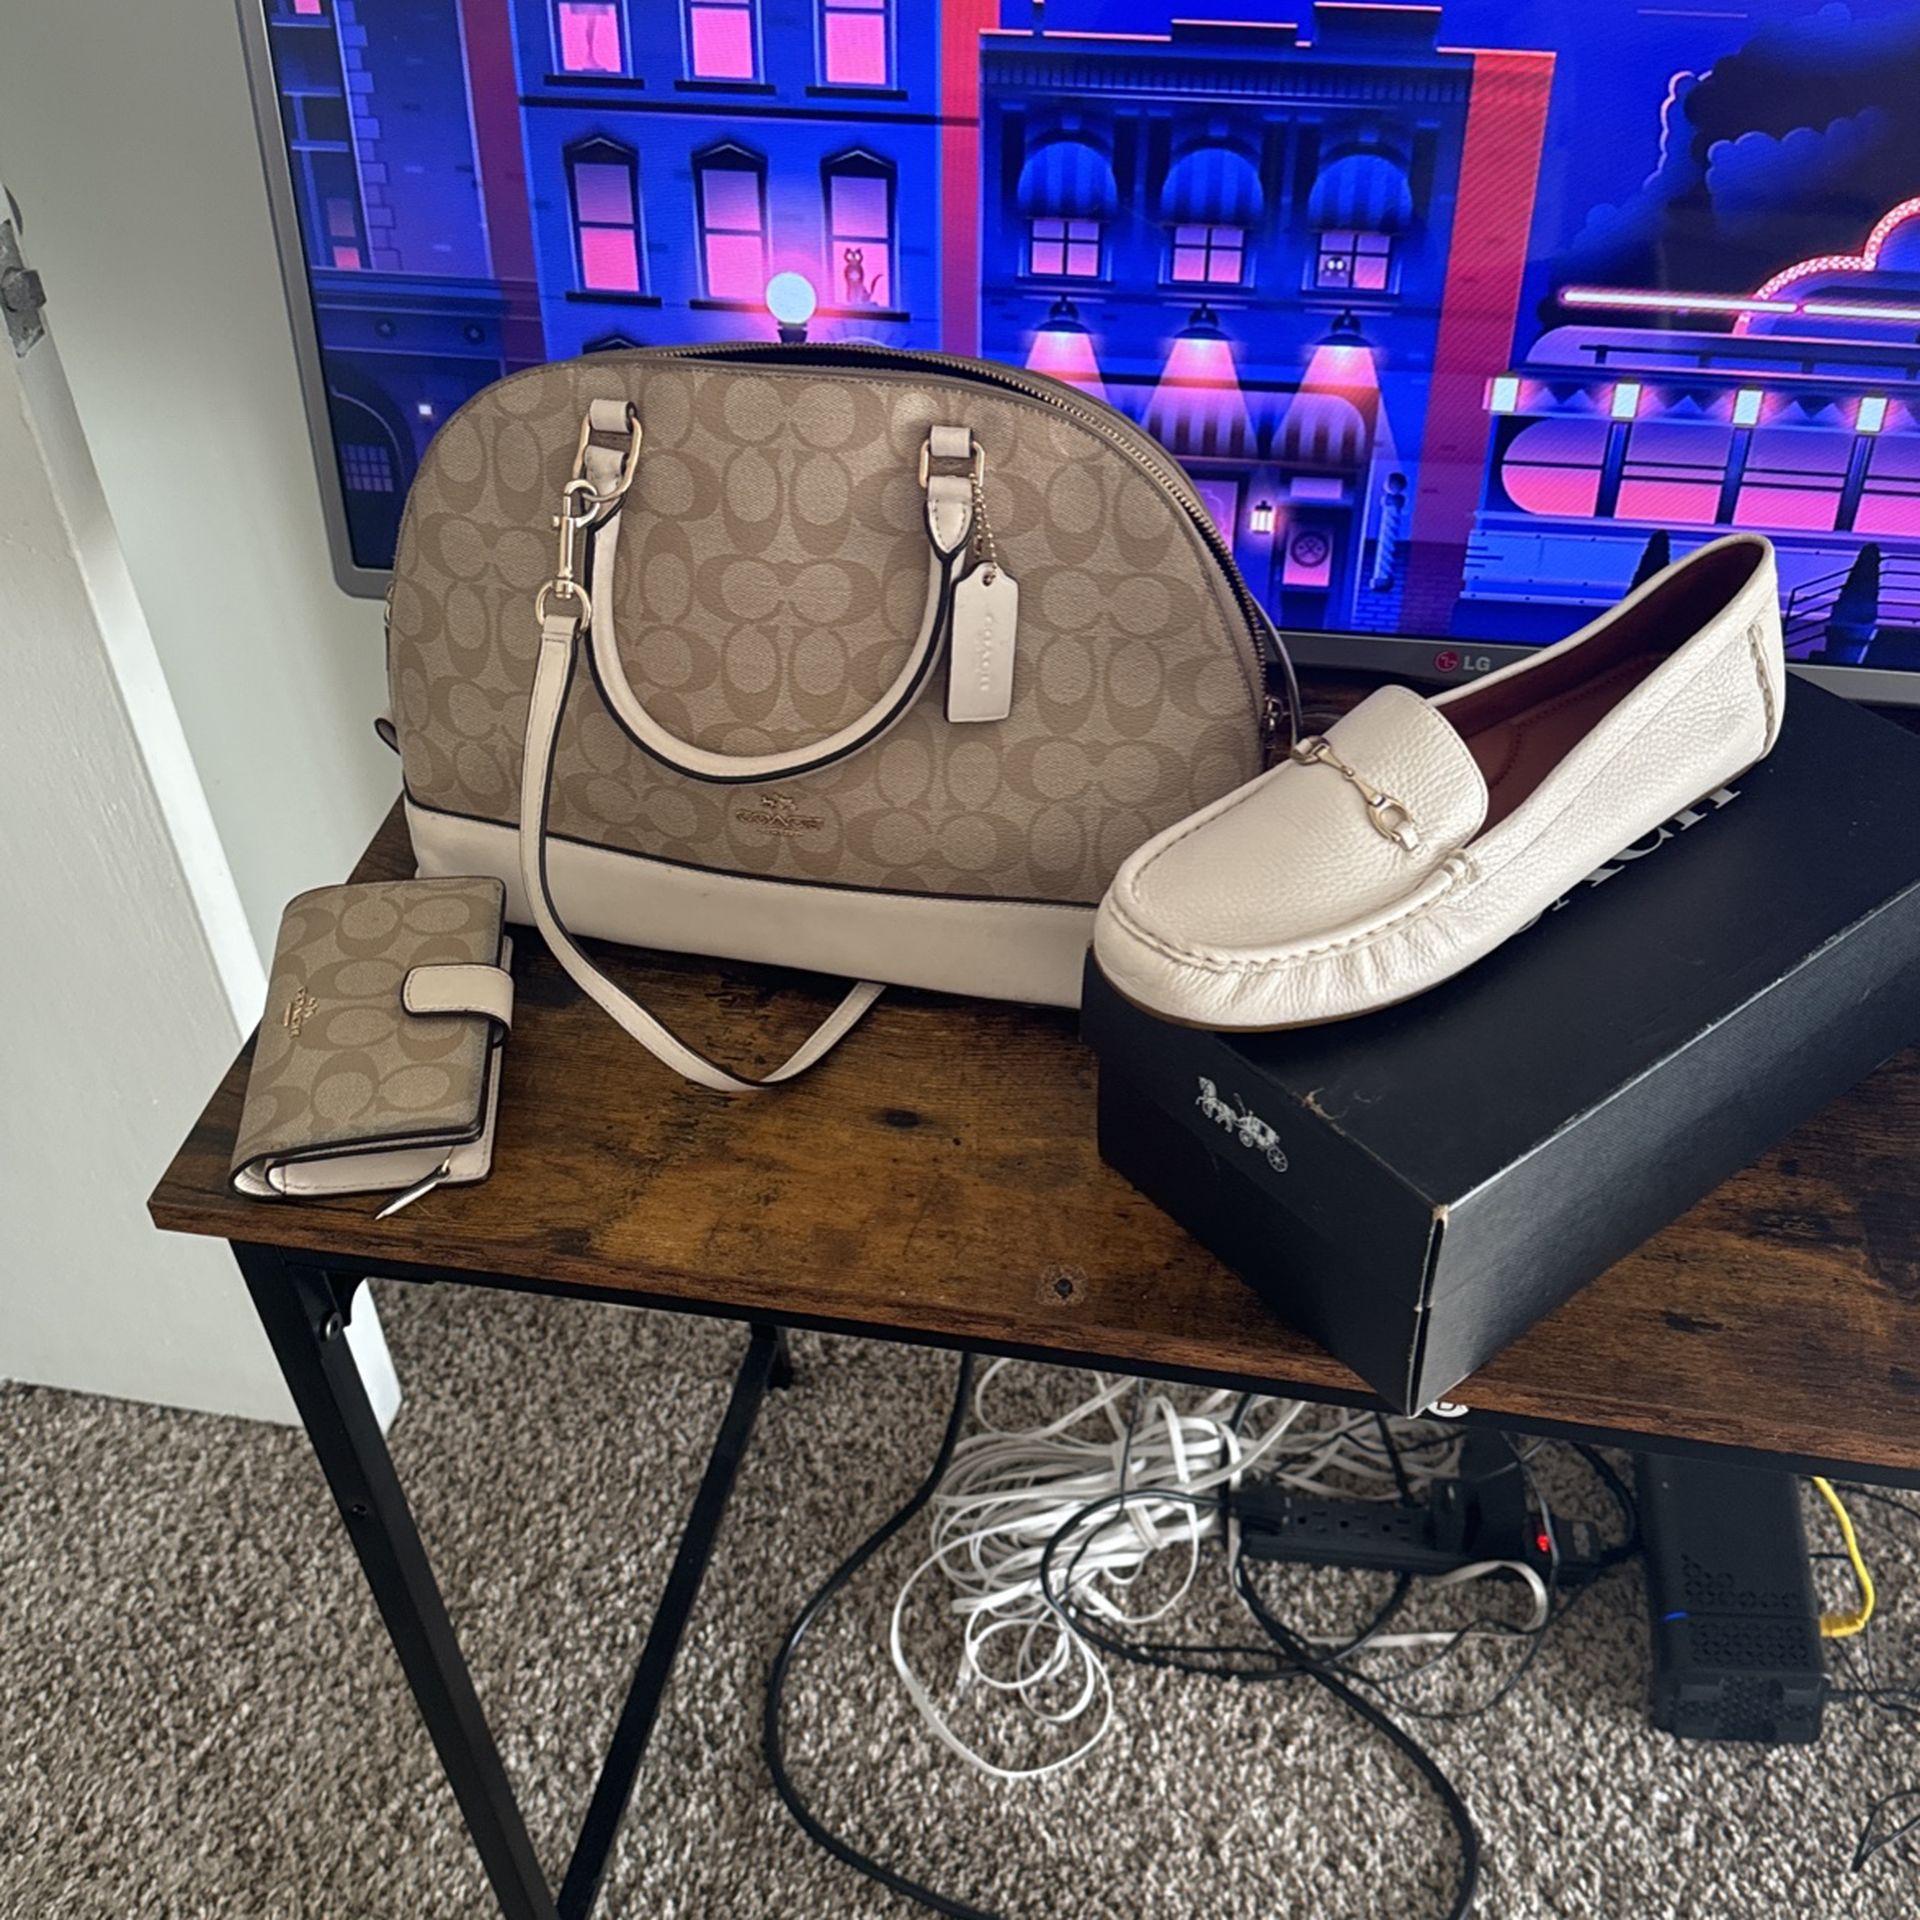 Coach Shoes And Wallet 